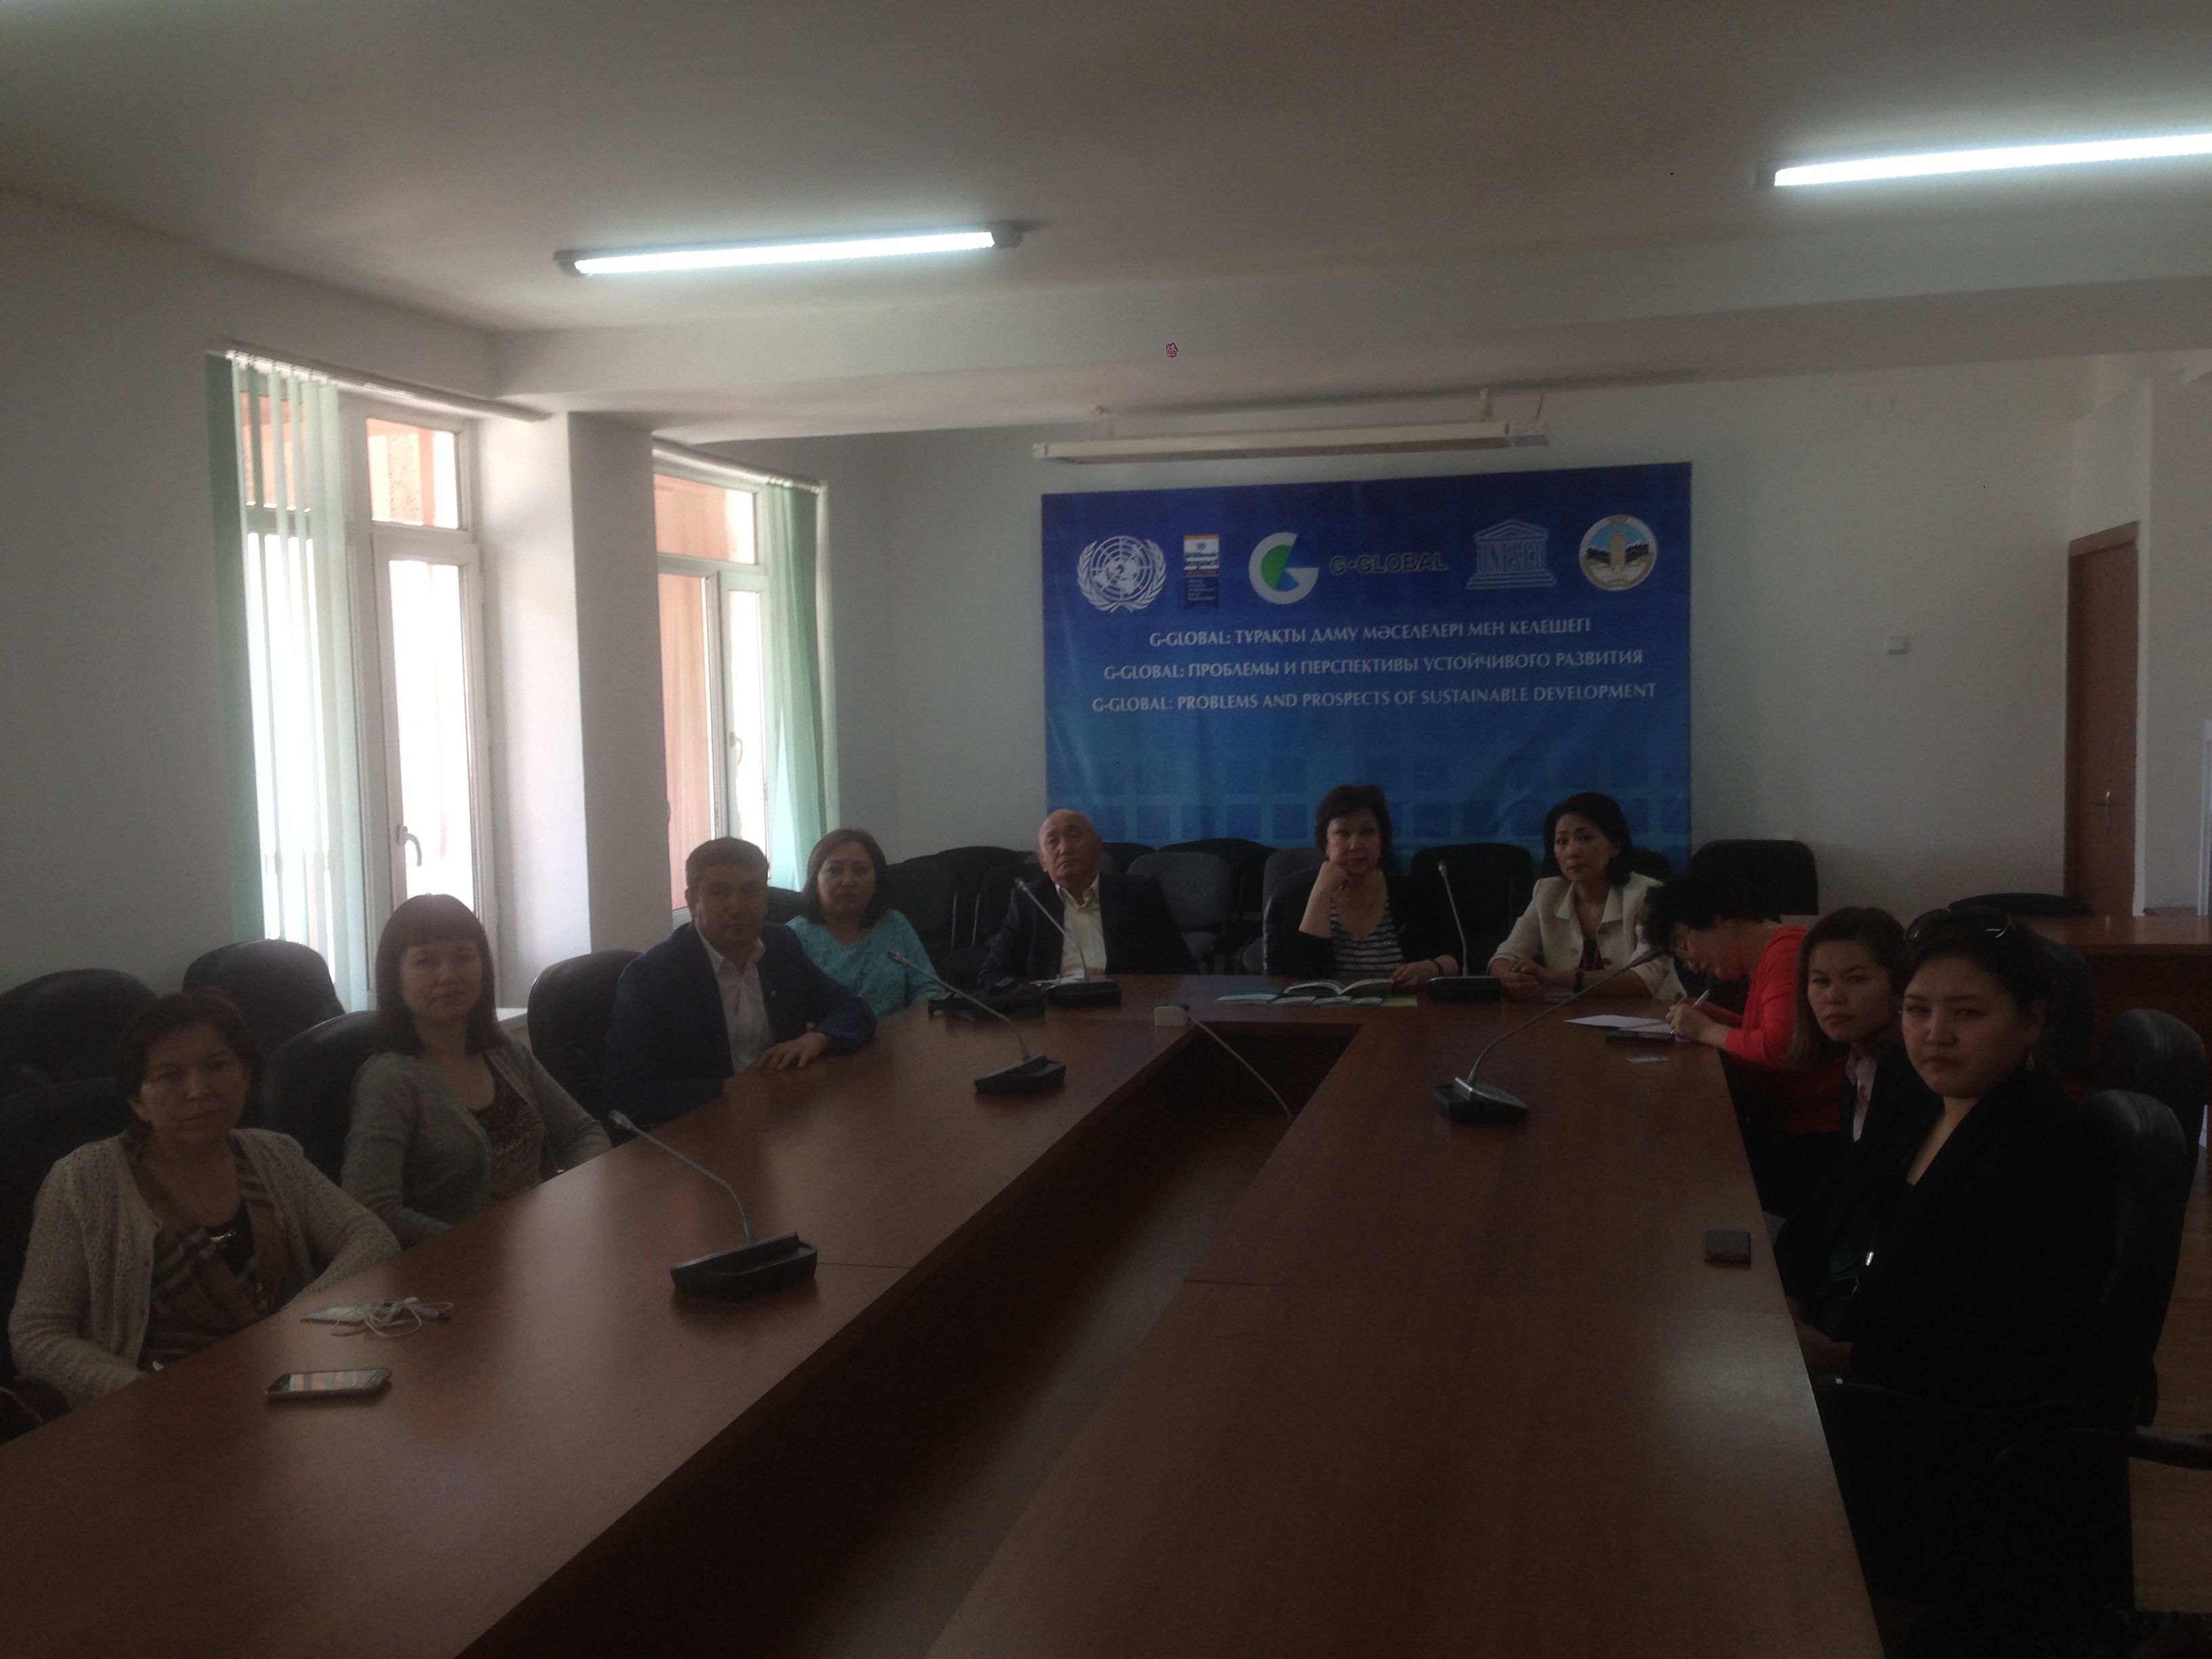 The role of higher education institutions in the development of green economy in Kazakhstan